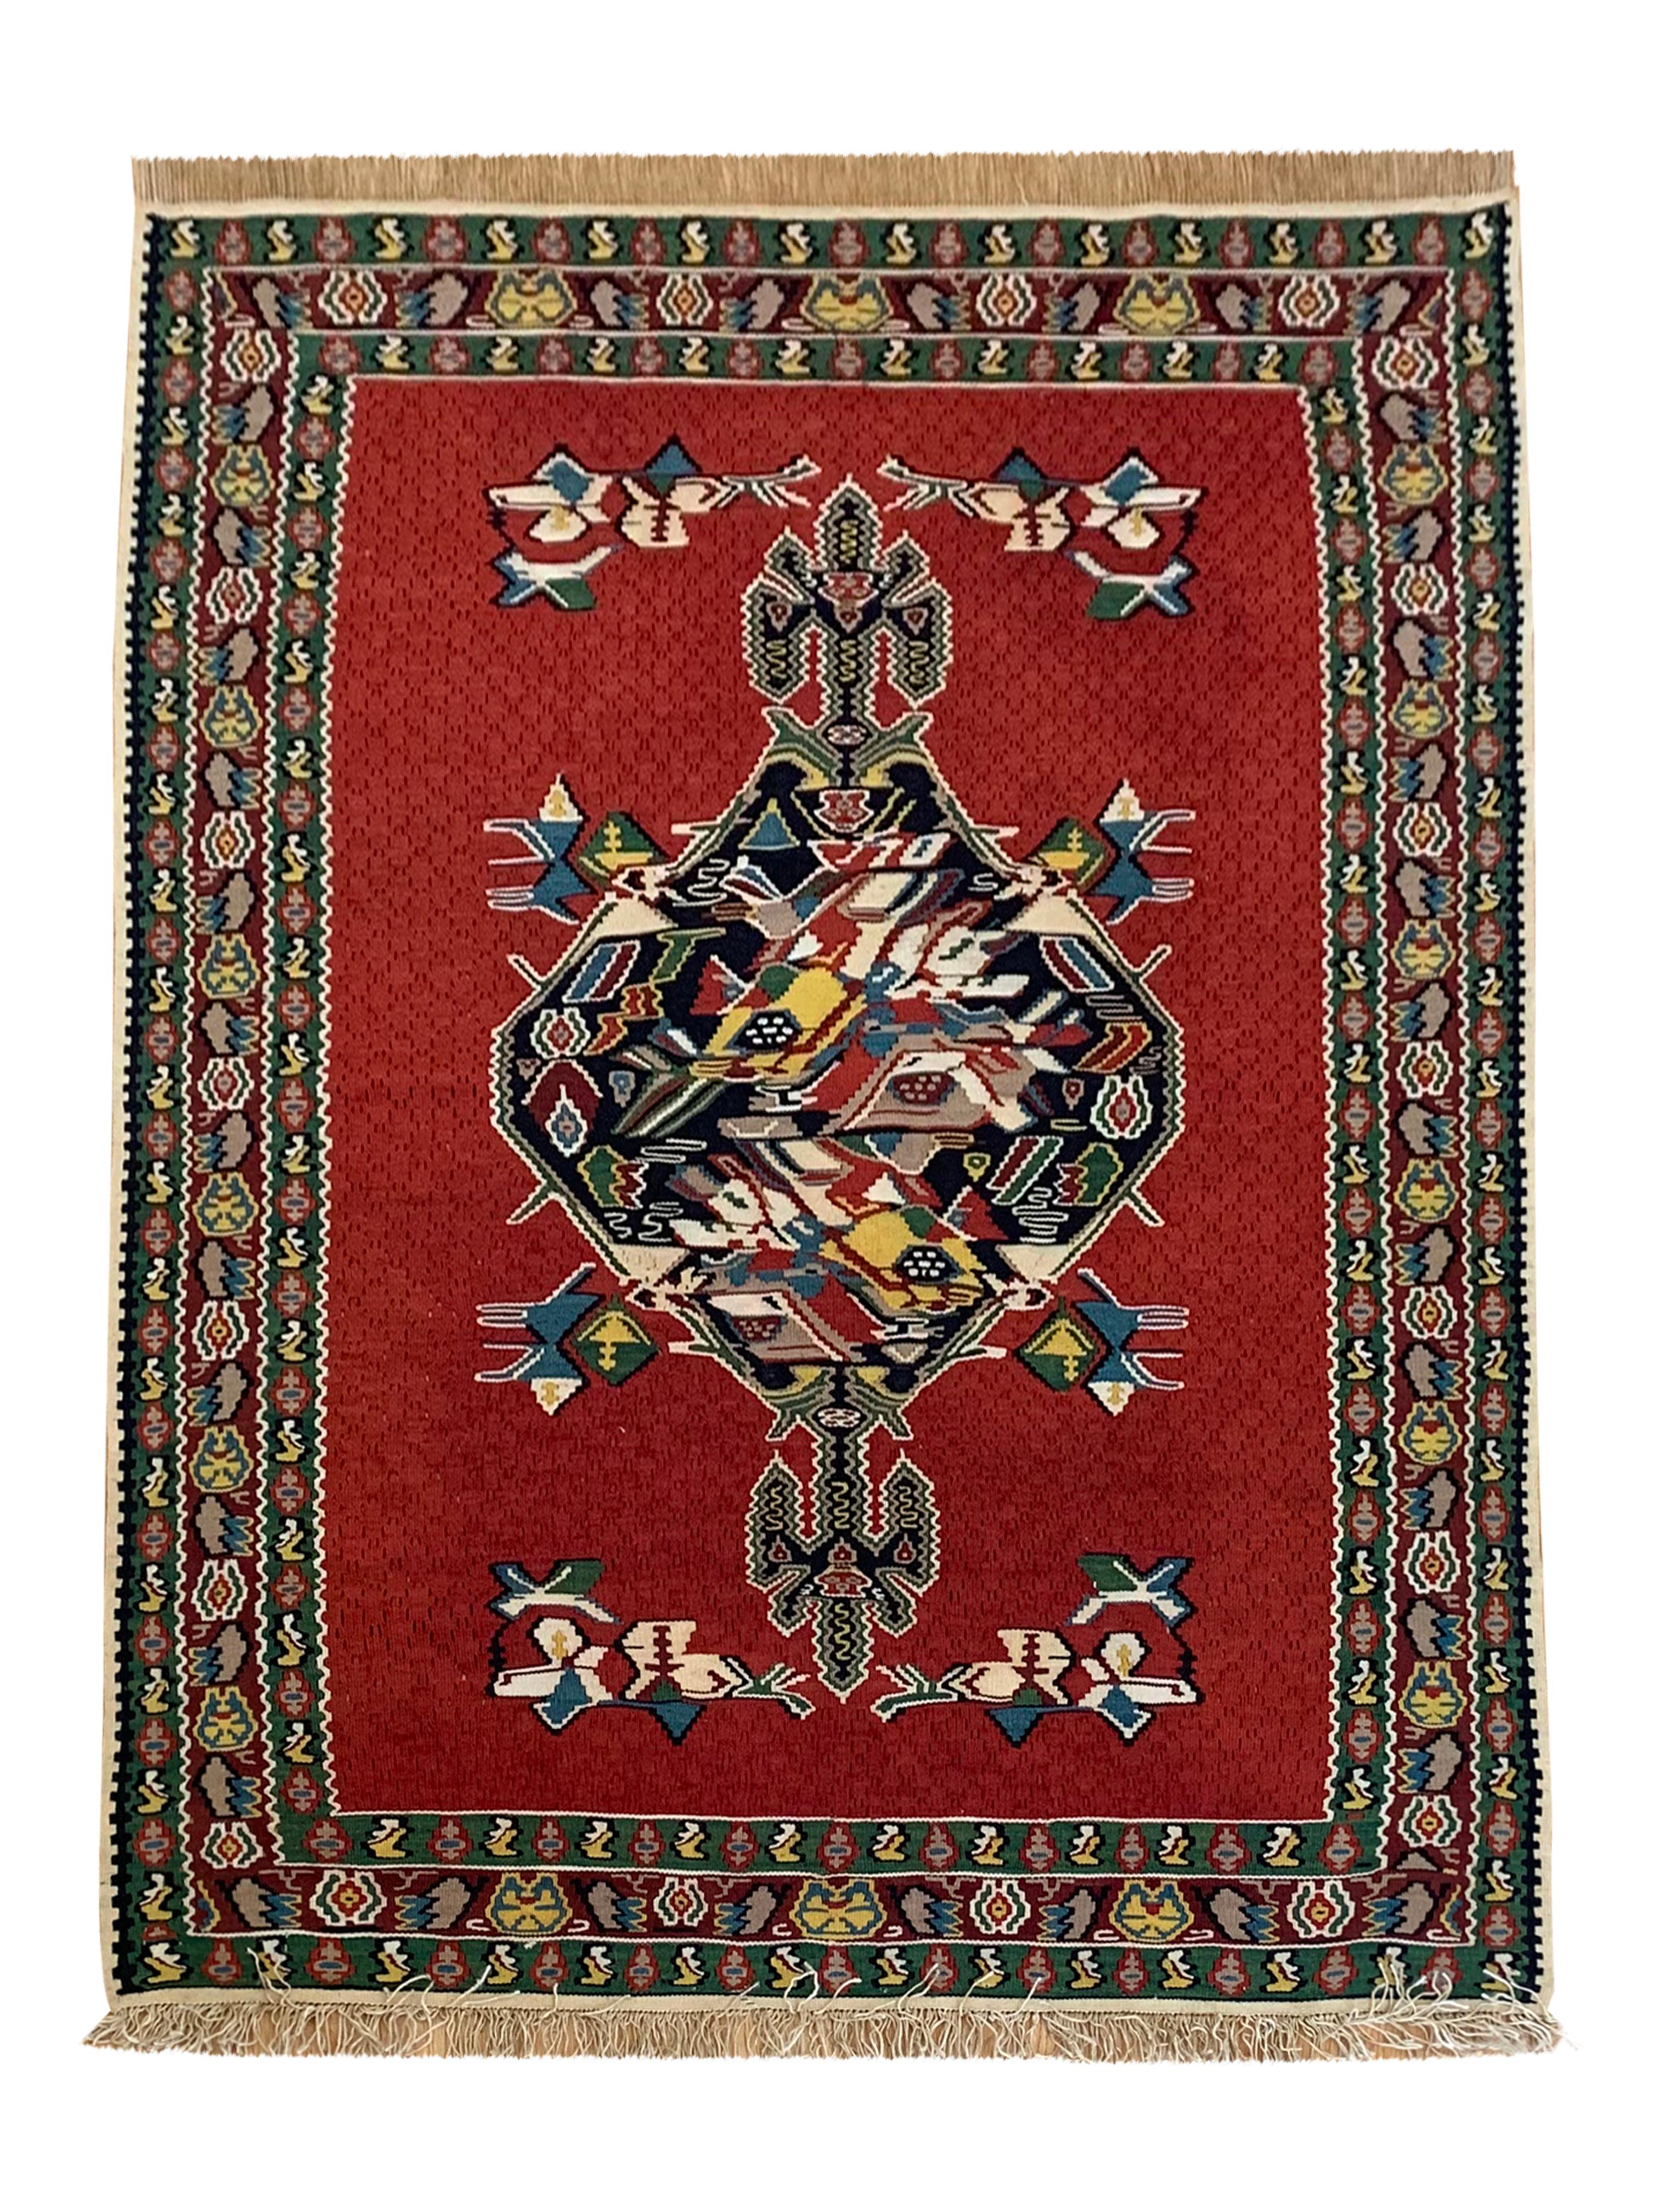 Pair of Red Silk and Wool Kilim Rugs Handmade Geometric Area Rugs For Sale 9